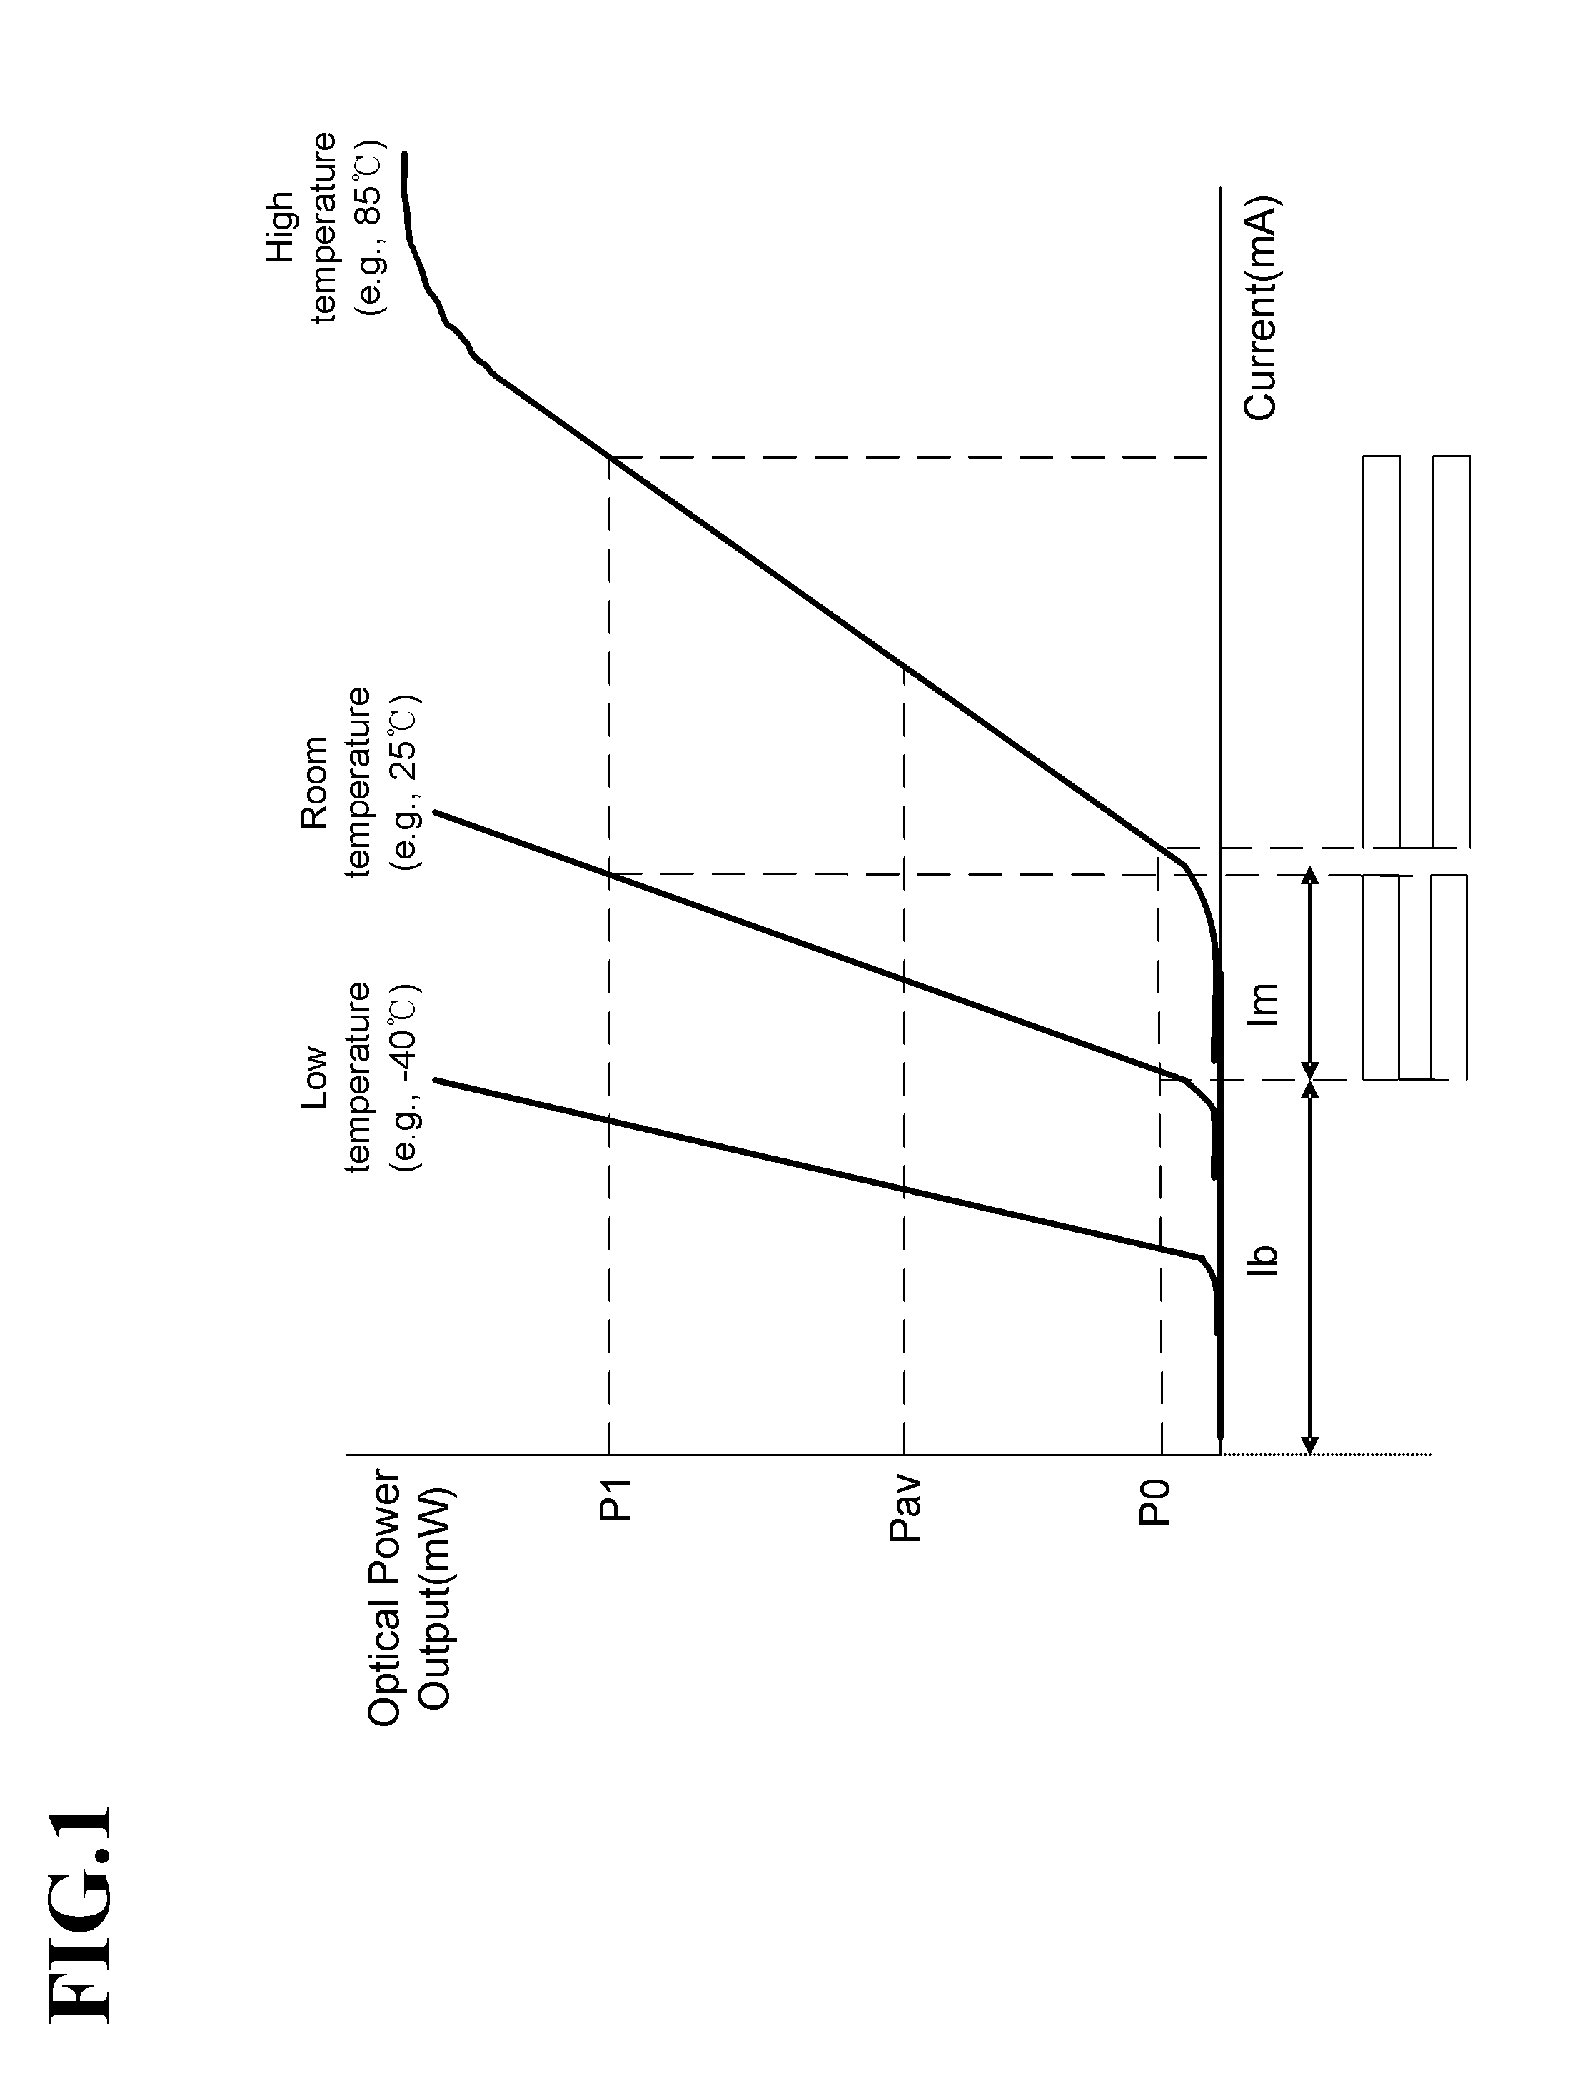 Apparatus and method for controlling optical power and extinction ratio